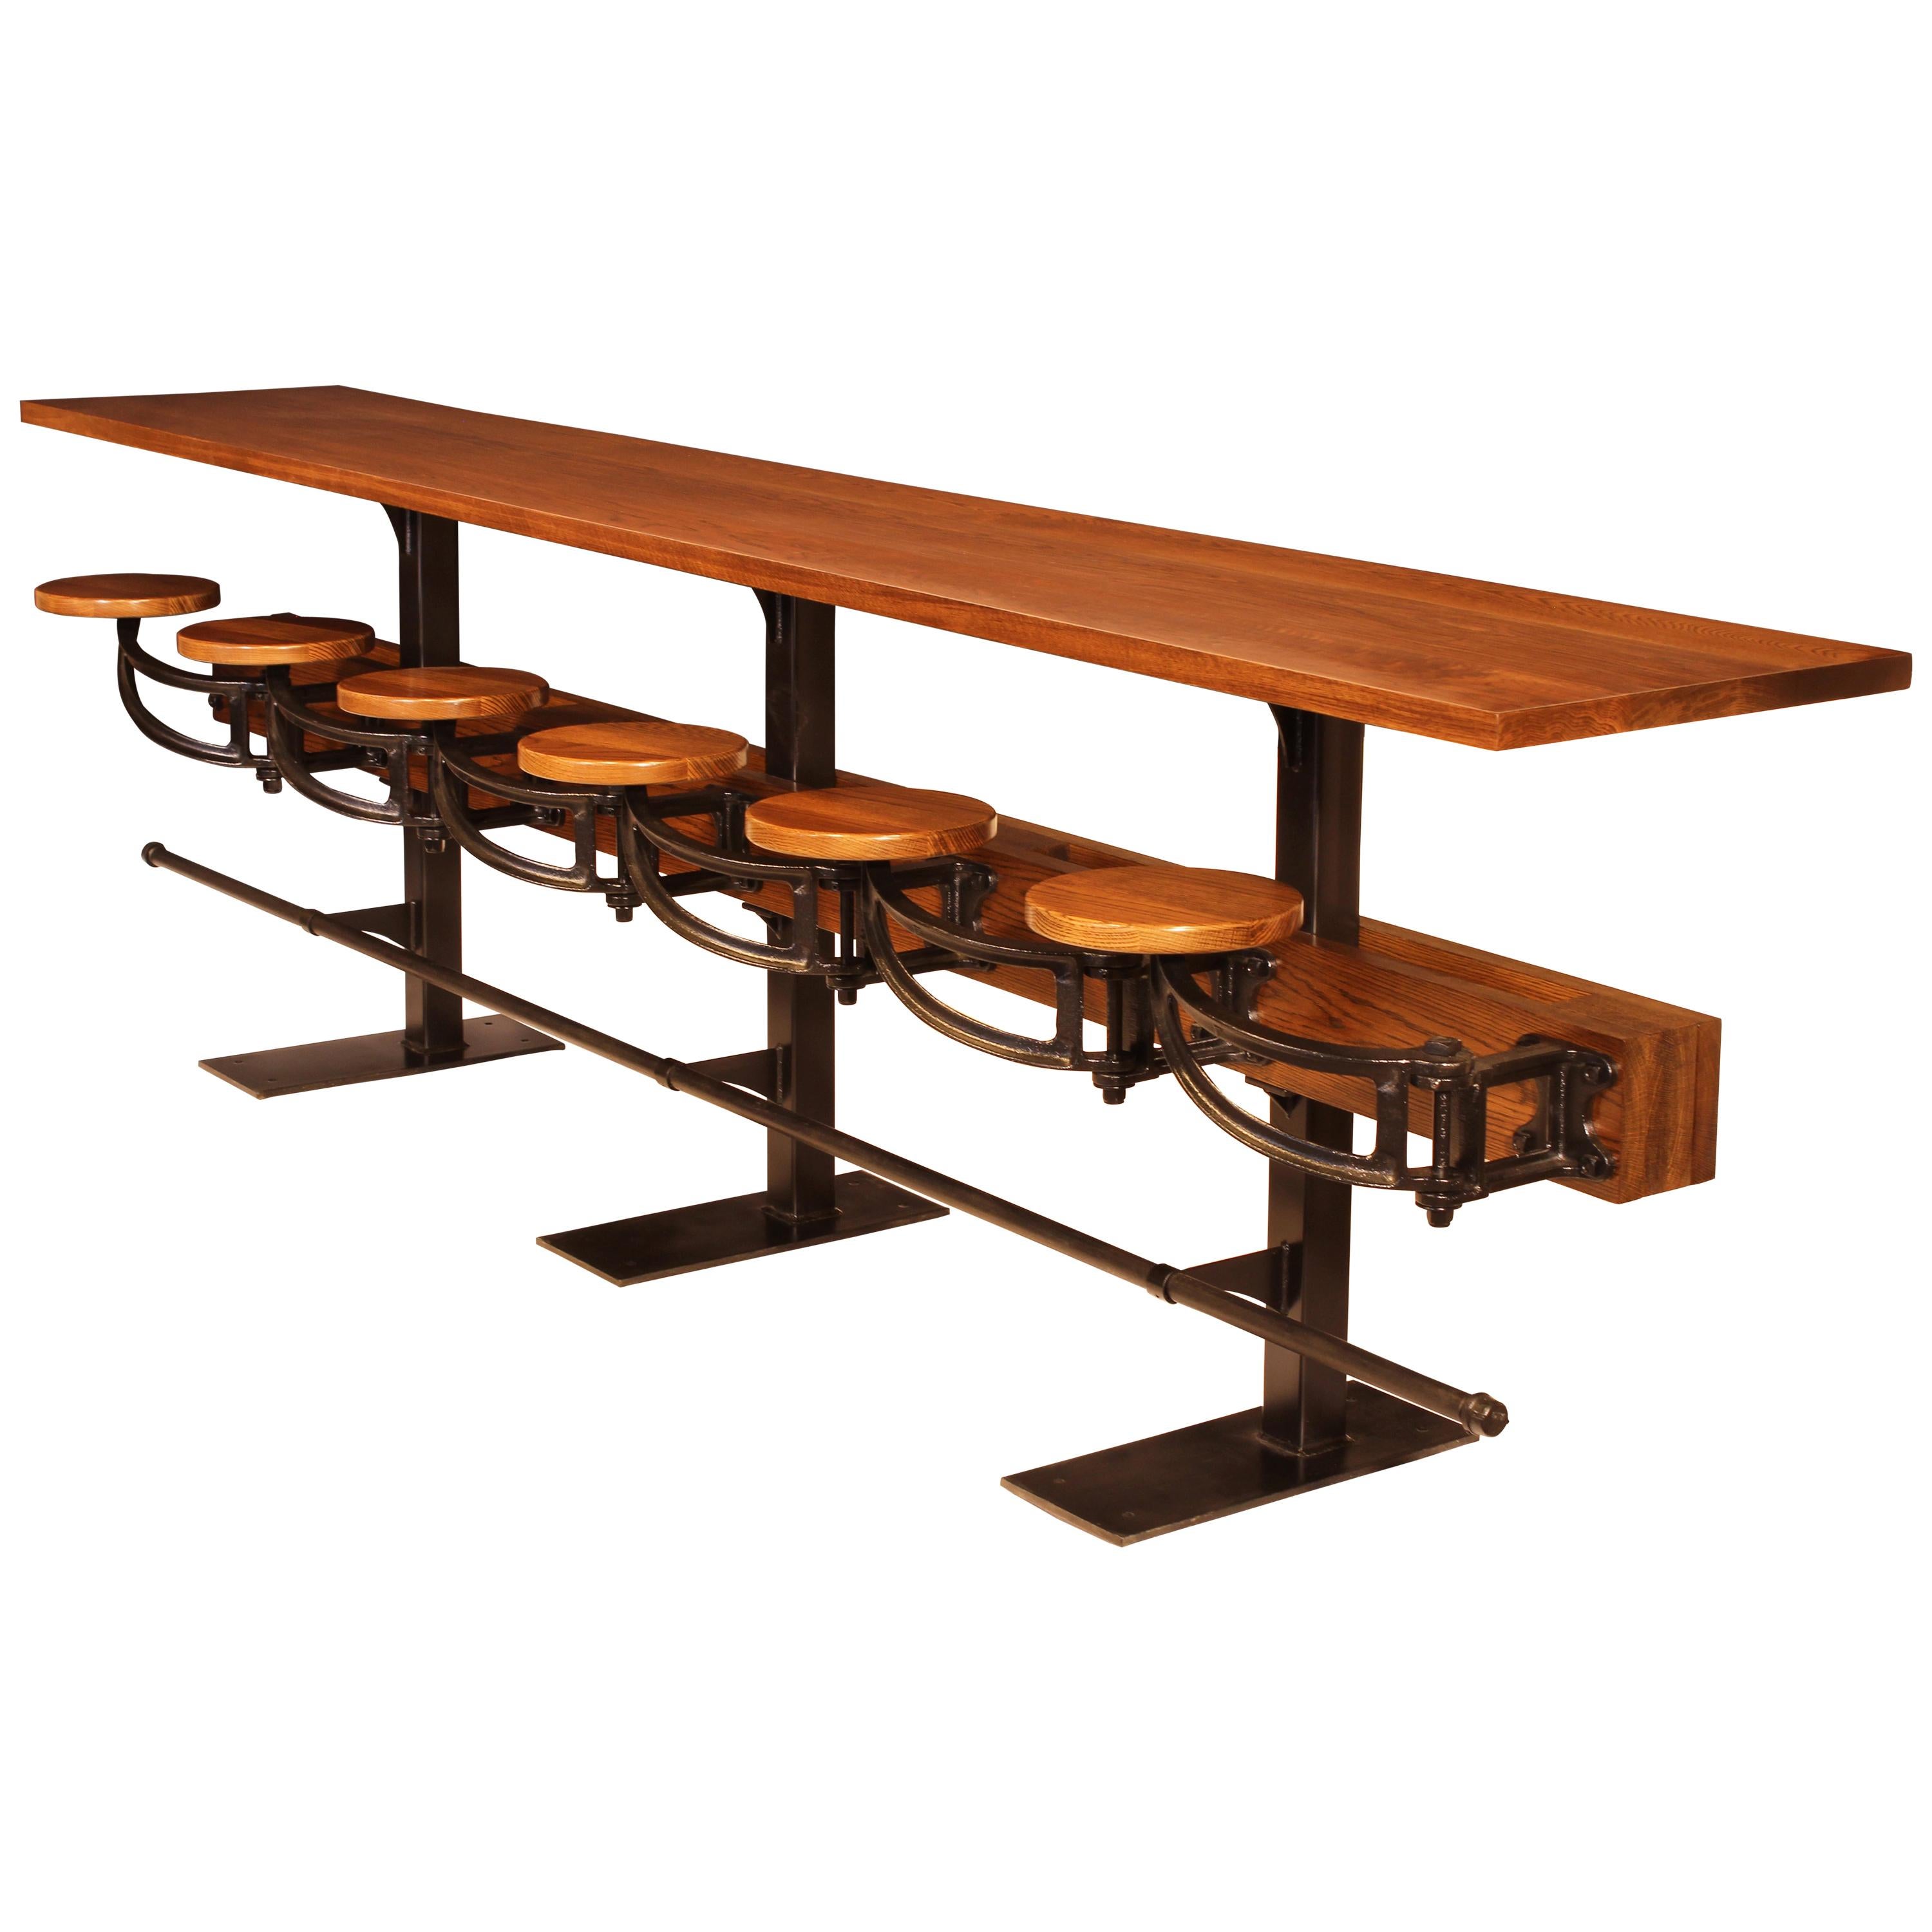 Counter height cafe wall table with attached cast iron swing-out seats. Example shown is red oak in a 12 foot length with six seats, three pedestals and foot rail. A great solution for adding additional seating to a wall section in your kitchen,